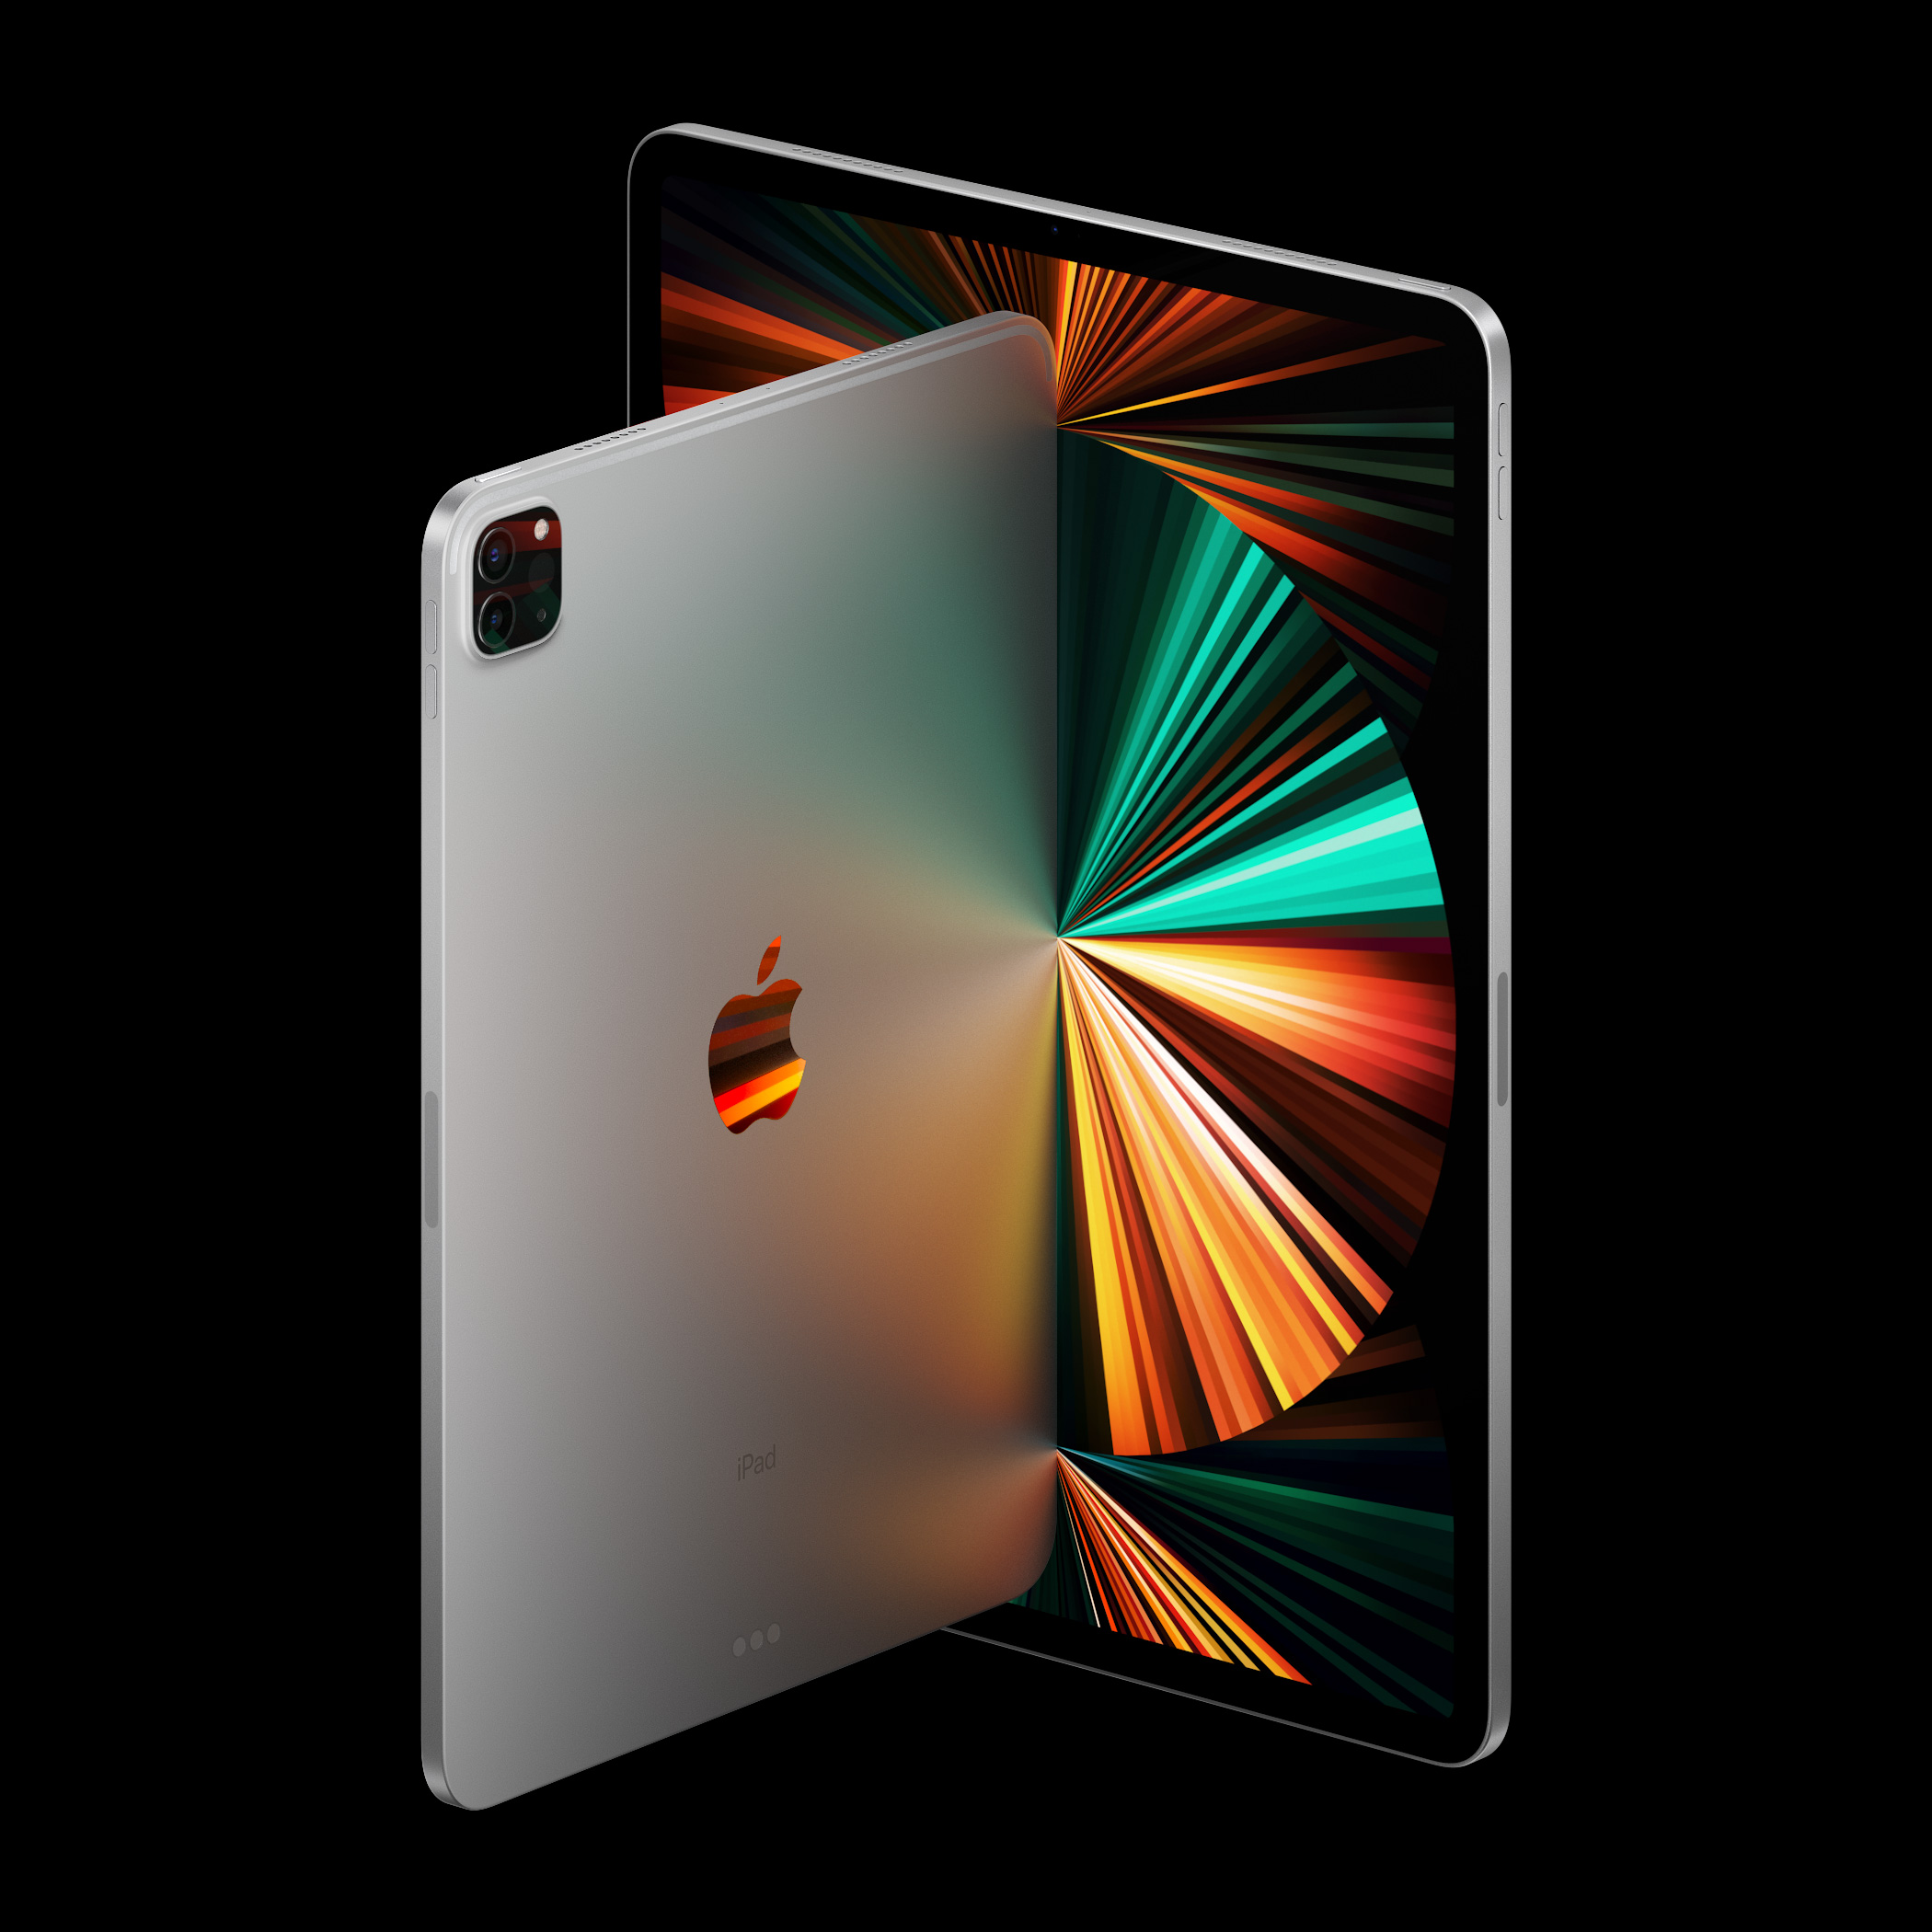 Apple Is Said to Face Continued Delays in Delivering iPad Pros - Bloomberg